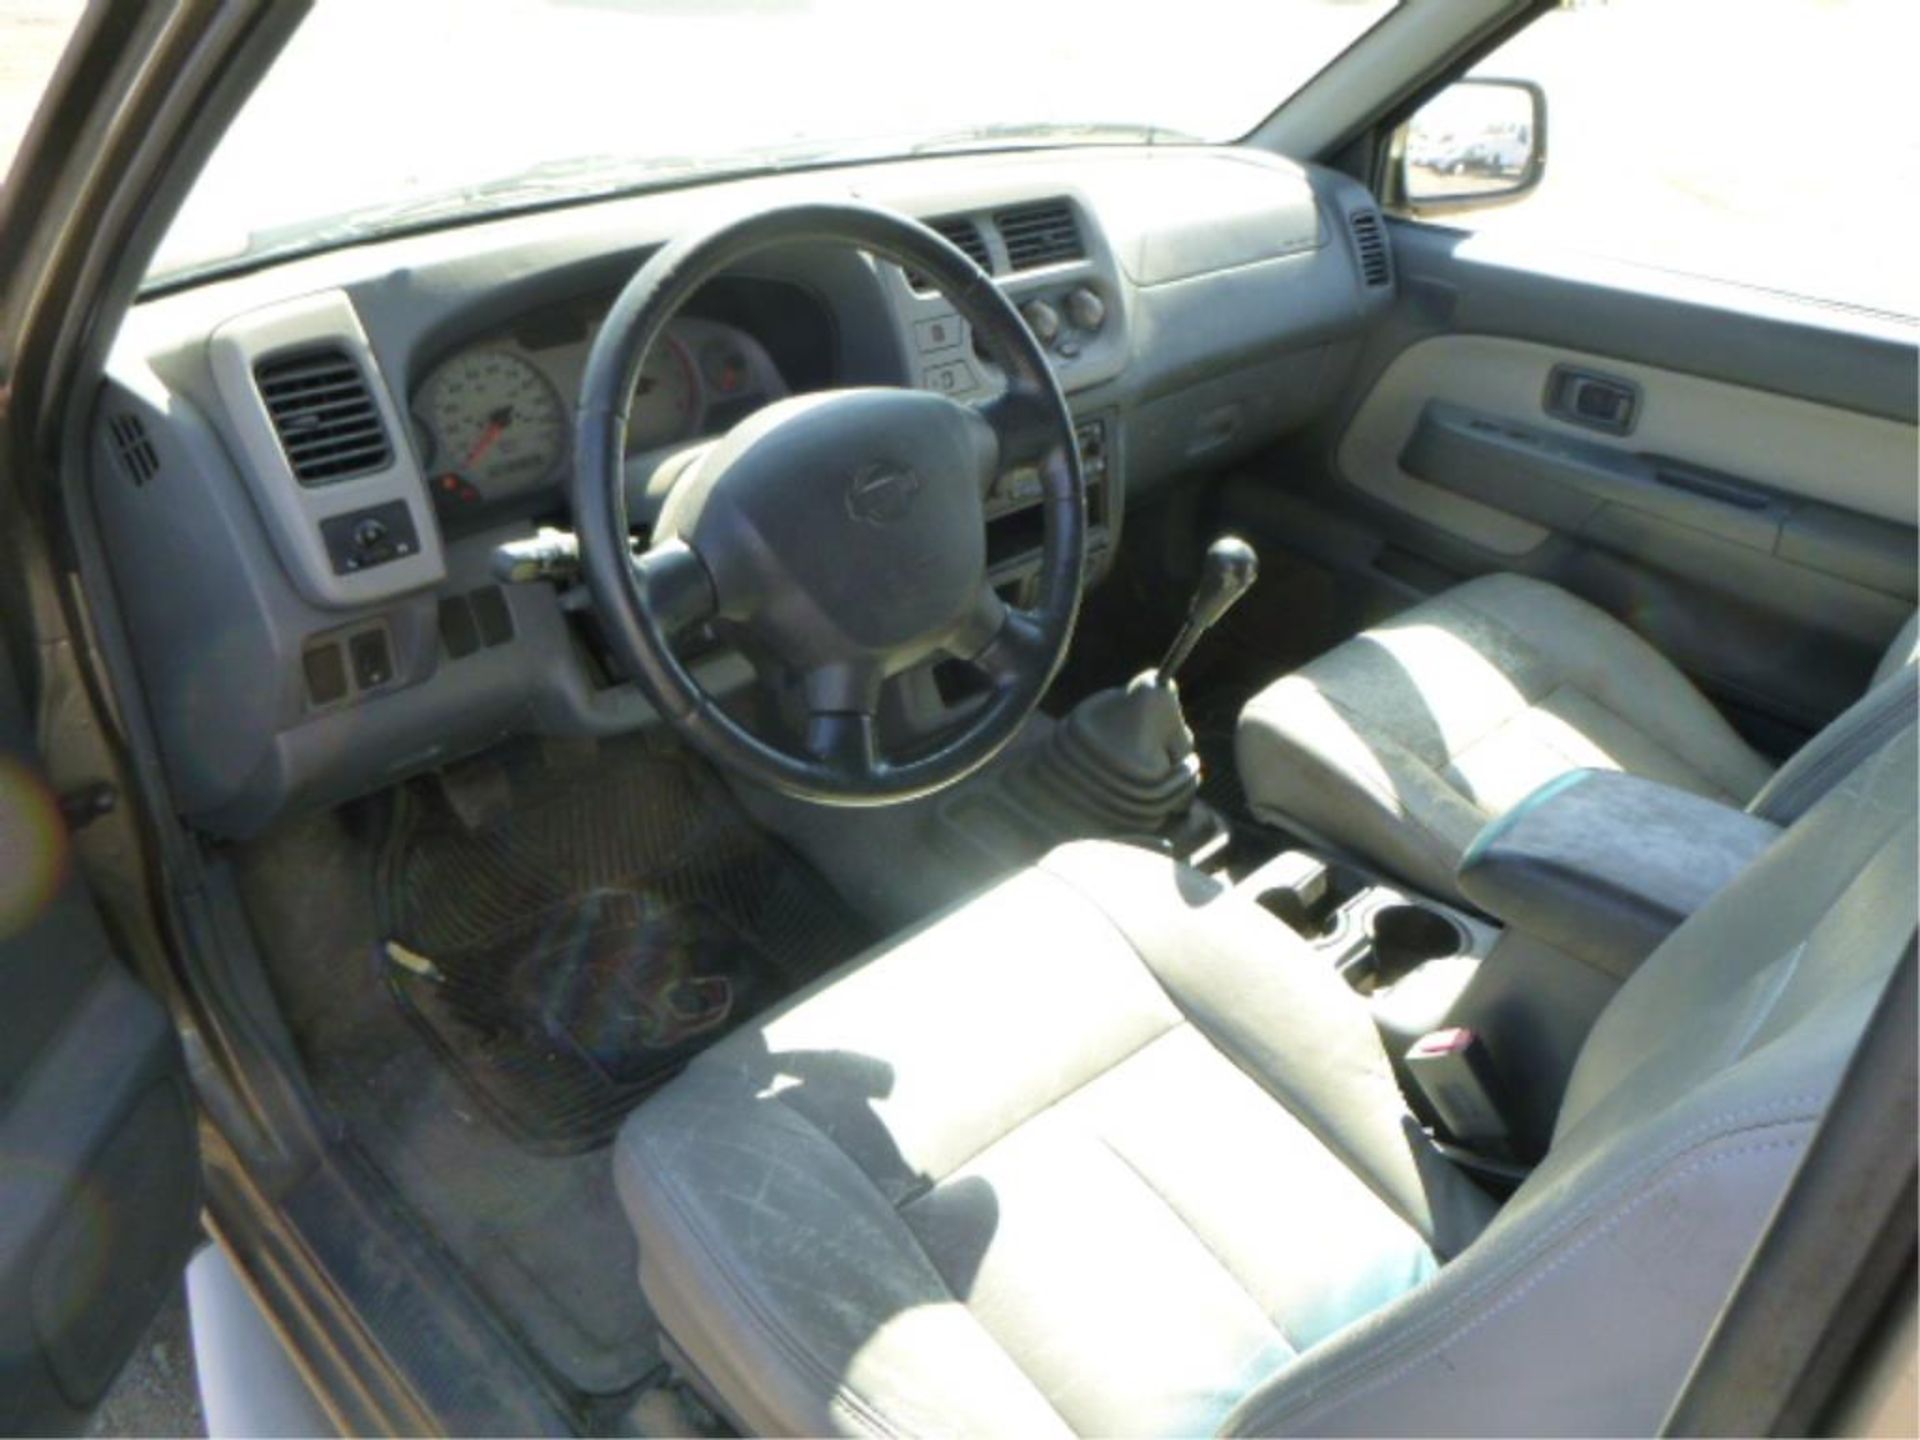 2001 Nissan Frontier - Image 10 of 13